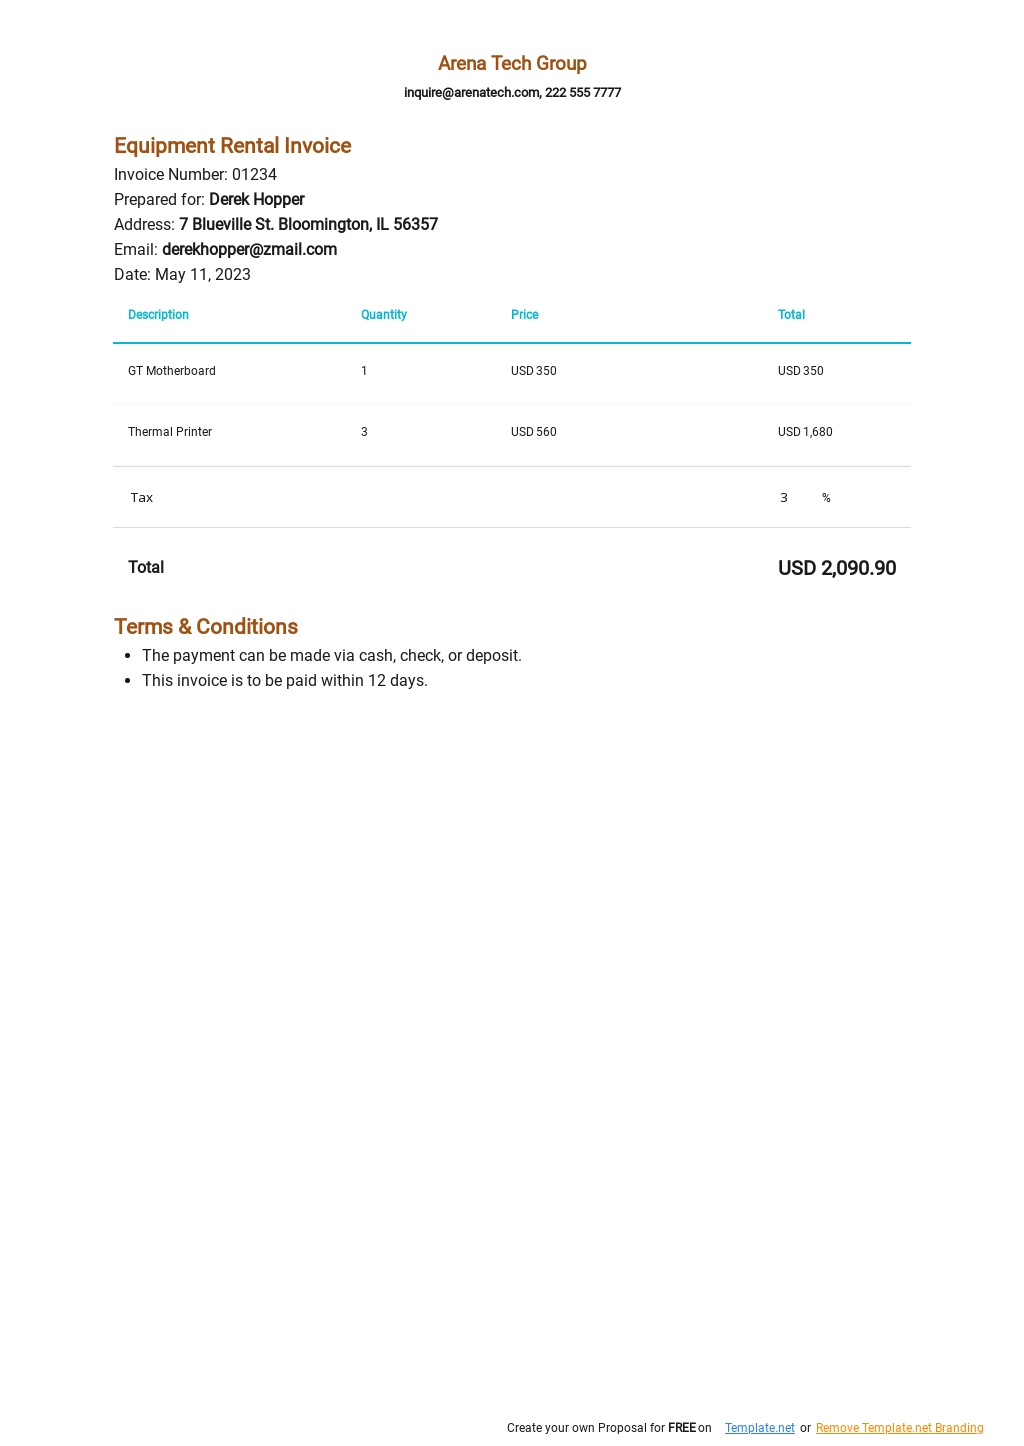 simple invoices format for renting equipment